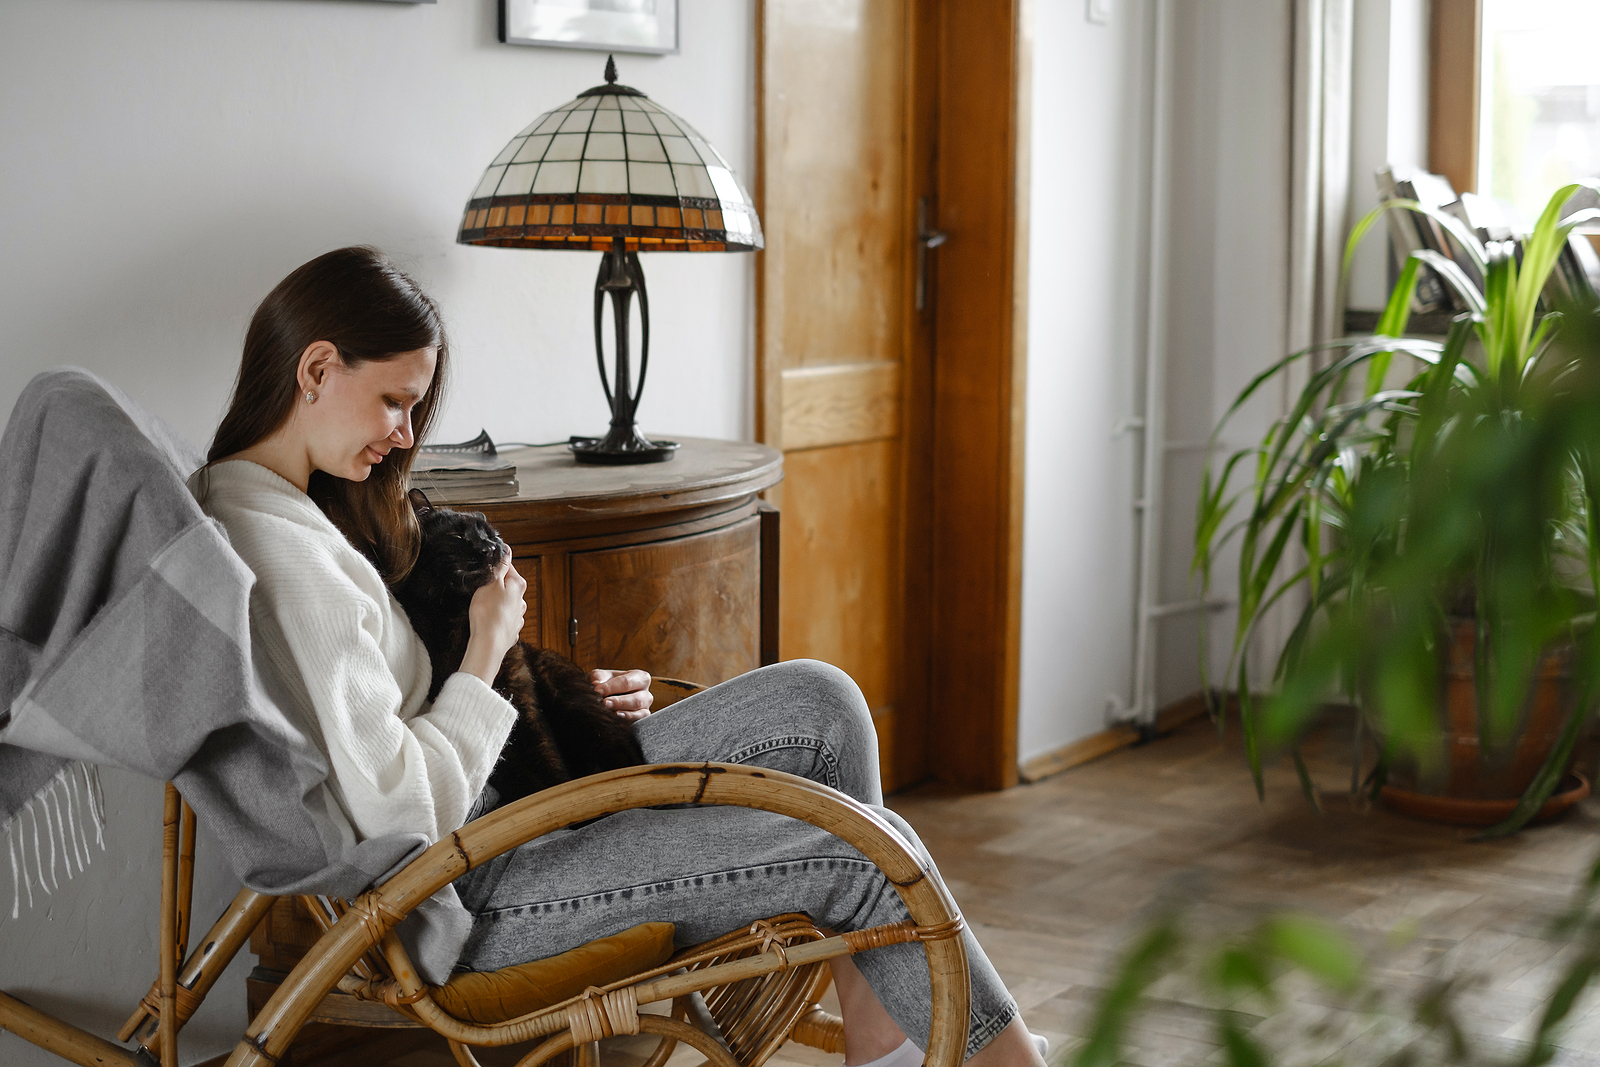 Young woman sitting contentedly in a chair with a black cat on her lap. Sometimes we need a bit of extra help to push past traumatic experiences. You can get that needed support through EMDR intensives in Virginia. Learn more here.